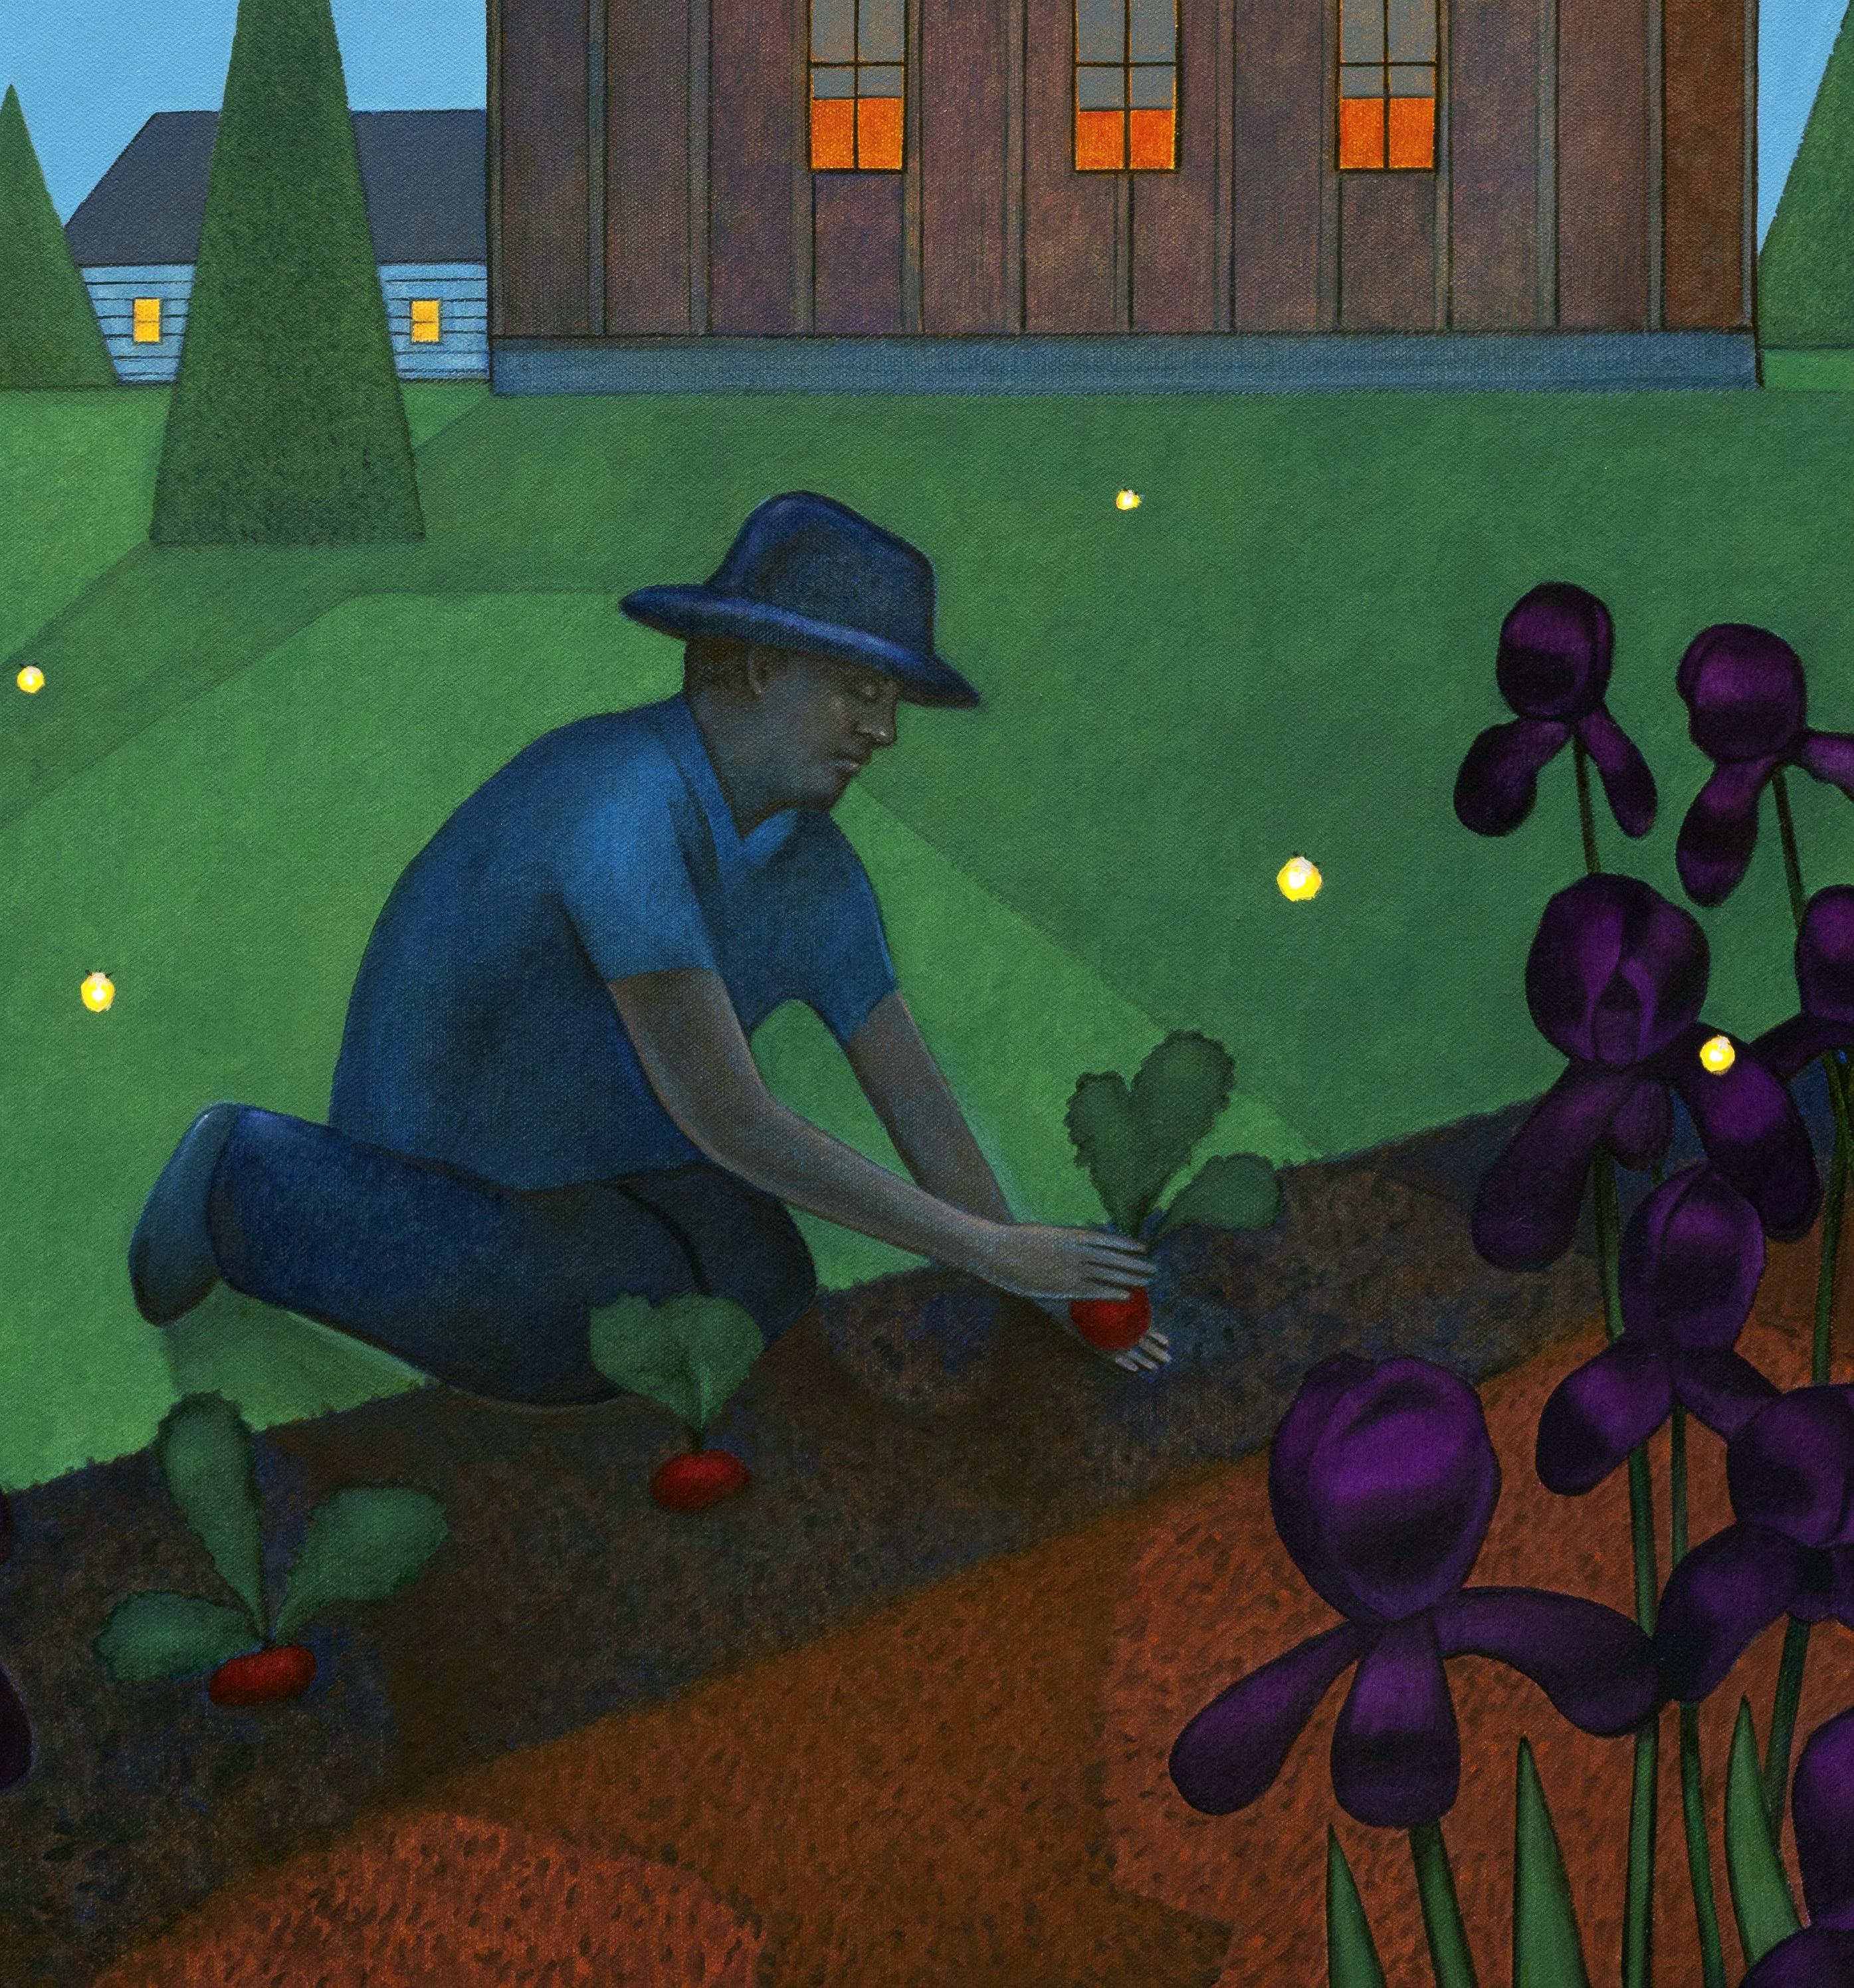 A full moon illuminates the landscape just enough to allow this gardener to tend his night shade plants in this illustrative painting by John Hrehov.  Fireflies dot the scene adding to the playfulness of the tableau.  This piece is floated in a